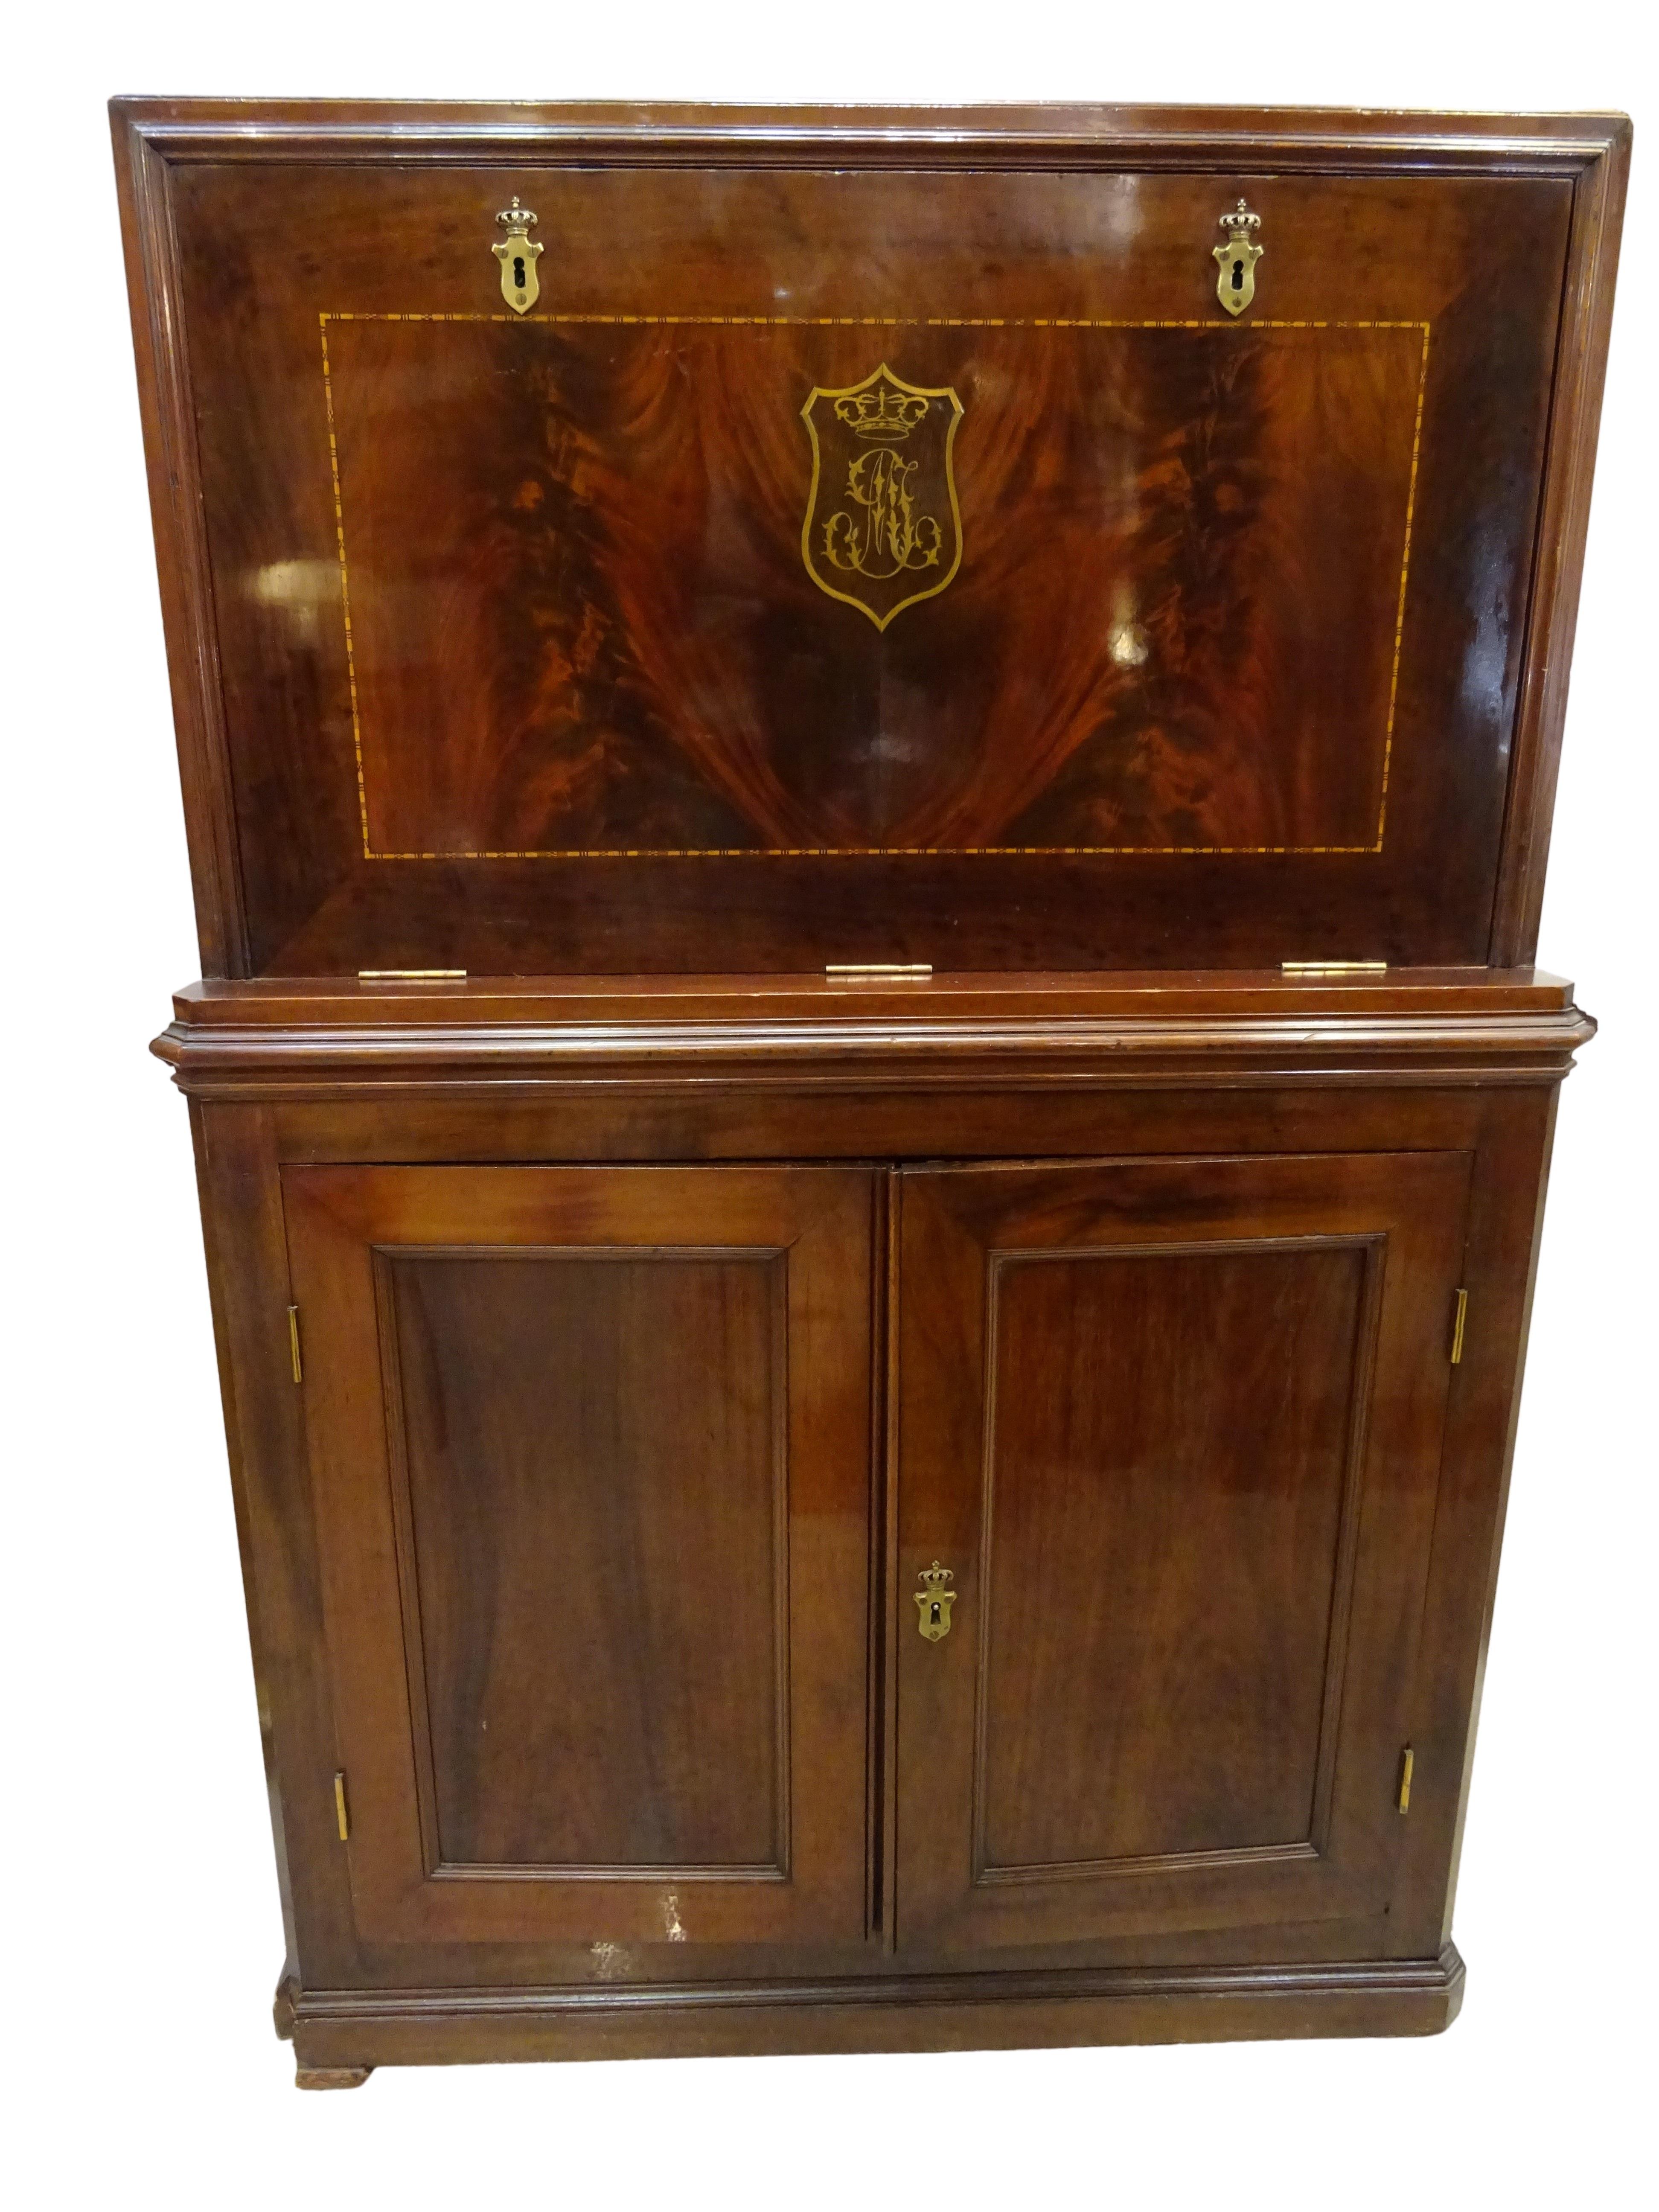 Edwardian English Cabinet, Wood and Bronce, from Dº Juan De Borbon and Dª María Collection